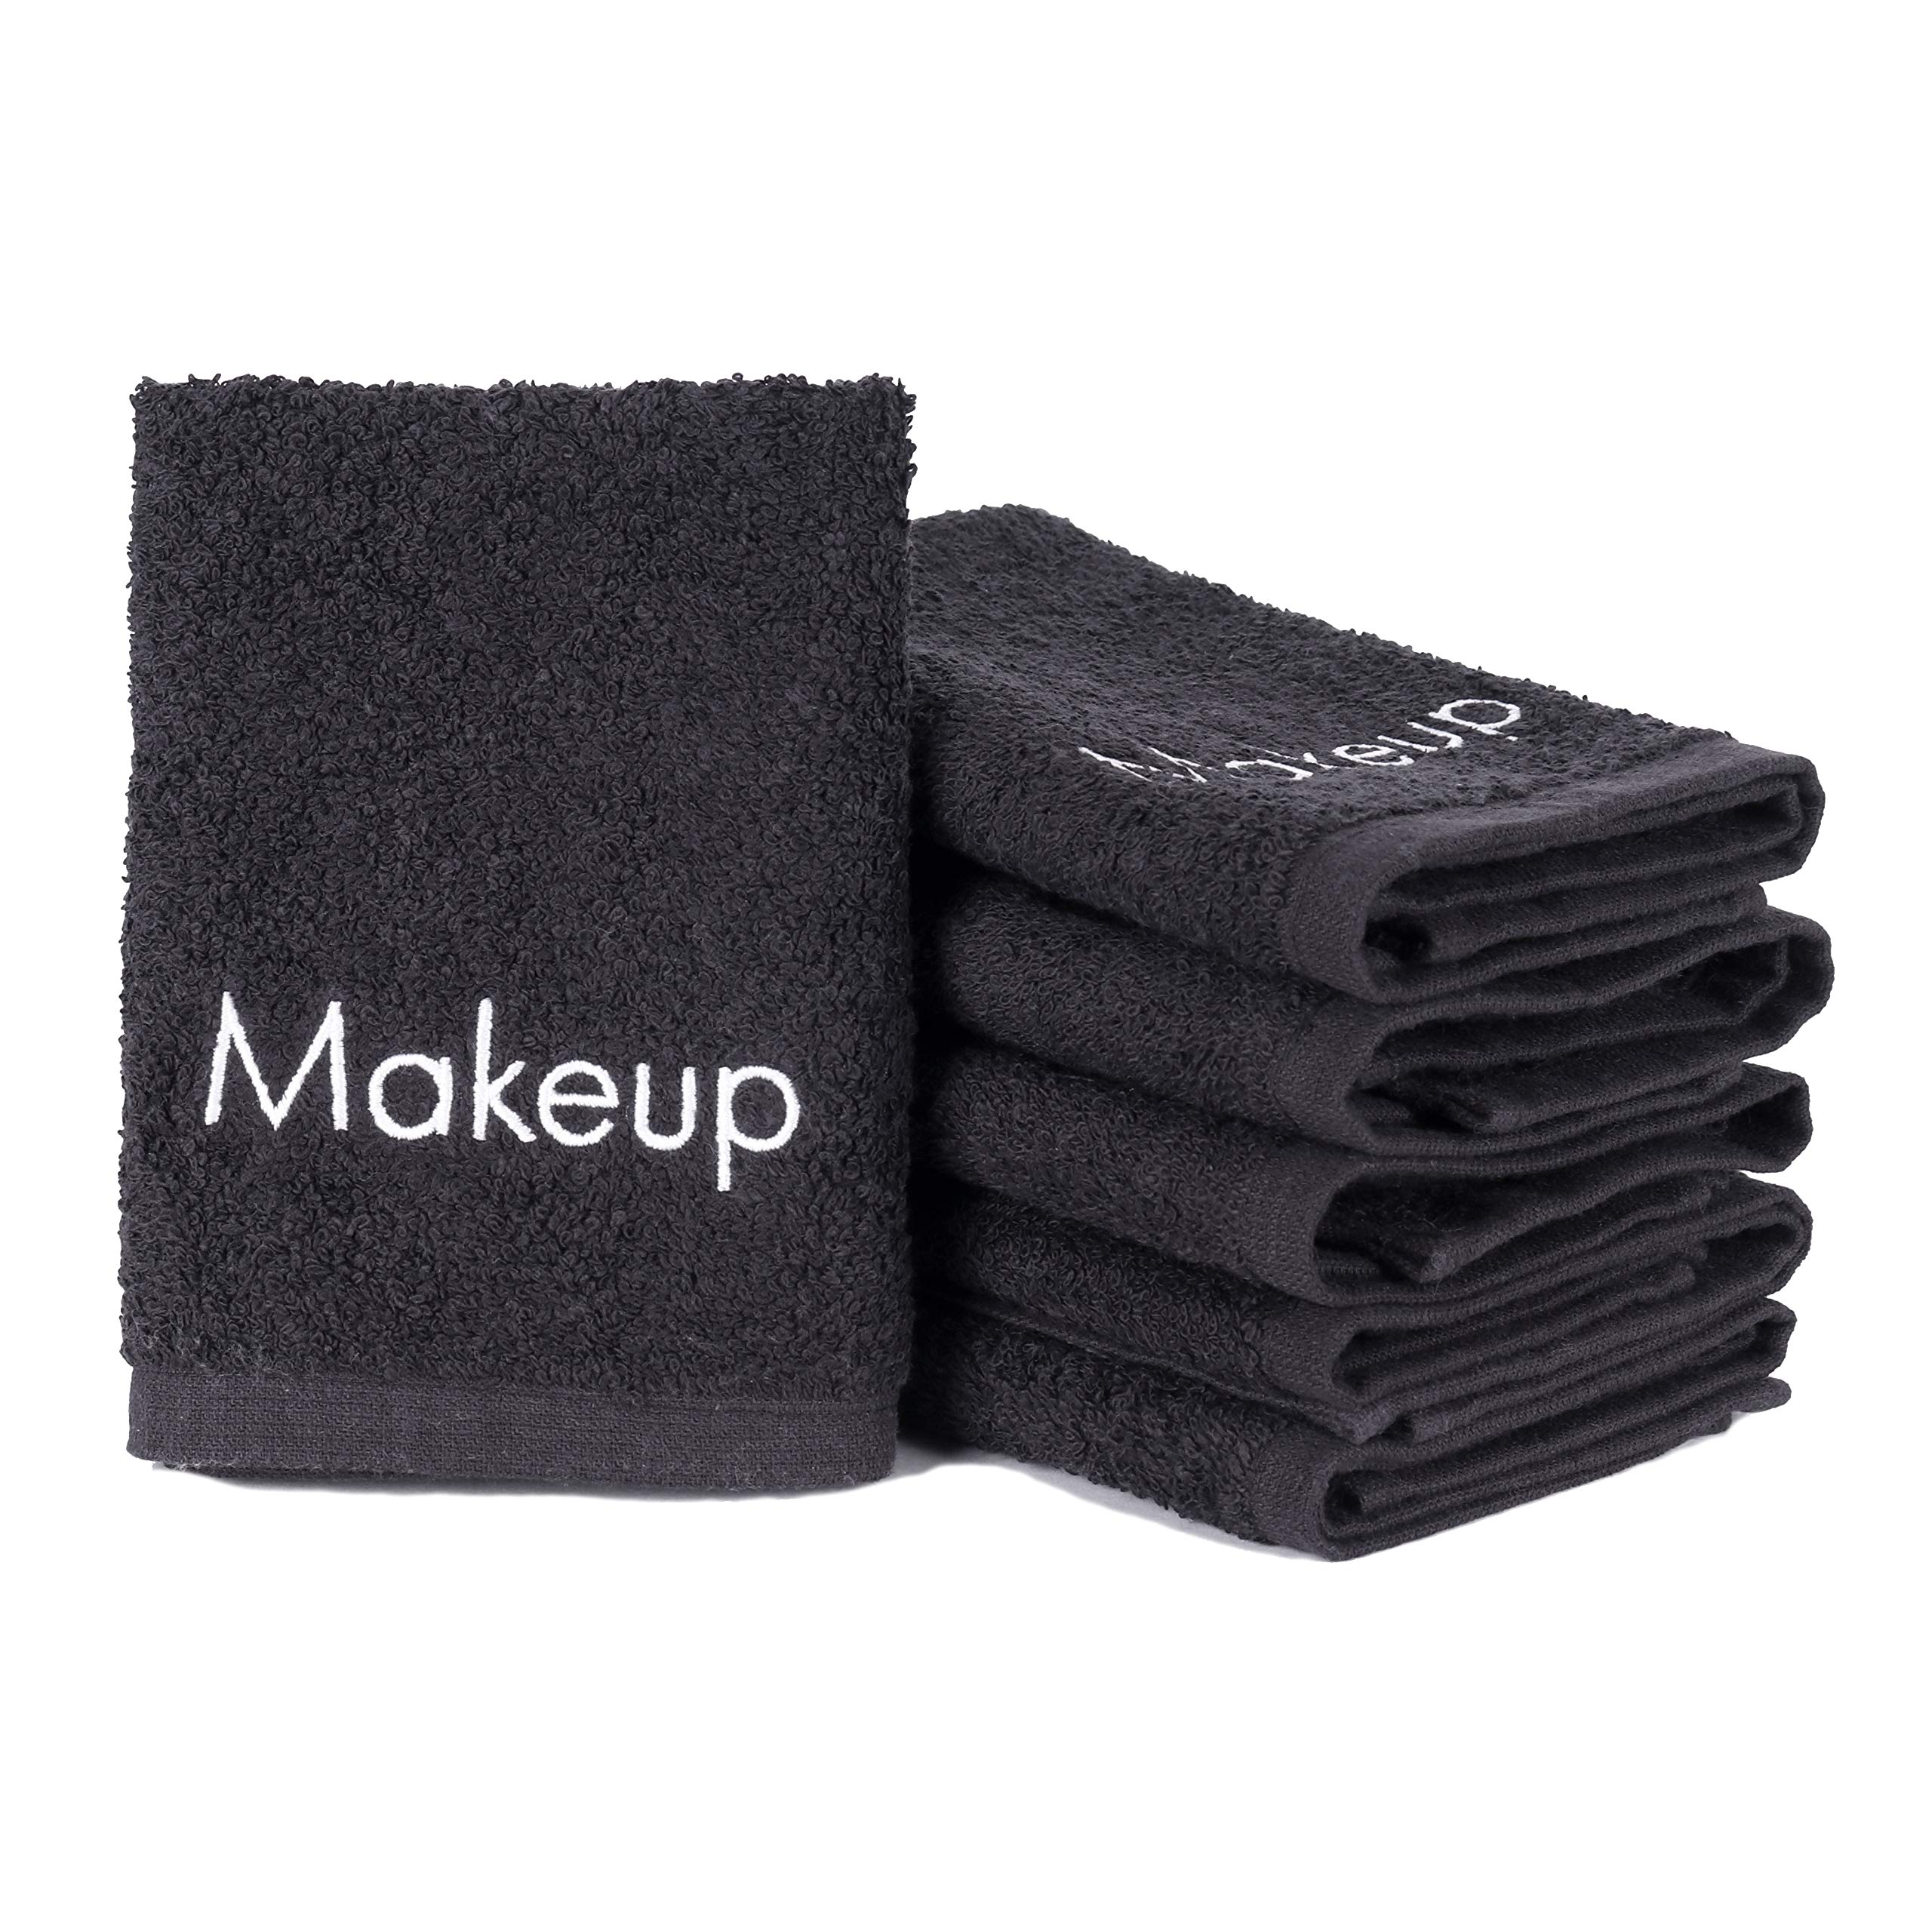 Arkwright Makeup Remover Wash Cloth - (Pack of 6) 100% Cotton Soft Quick  Dry Fingertip Face Towel Washcloths for Hand and Make Up, 11 x 17 in, Black